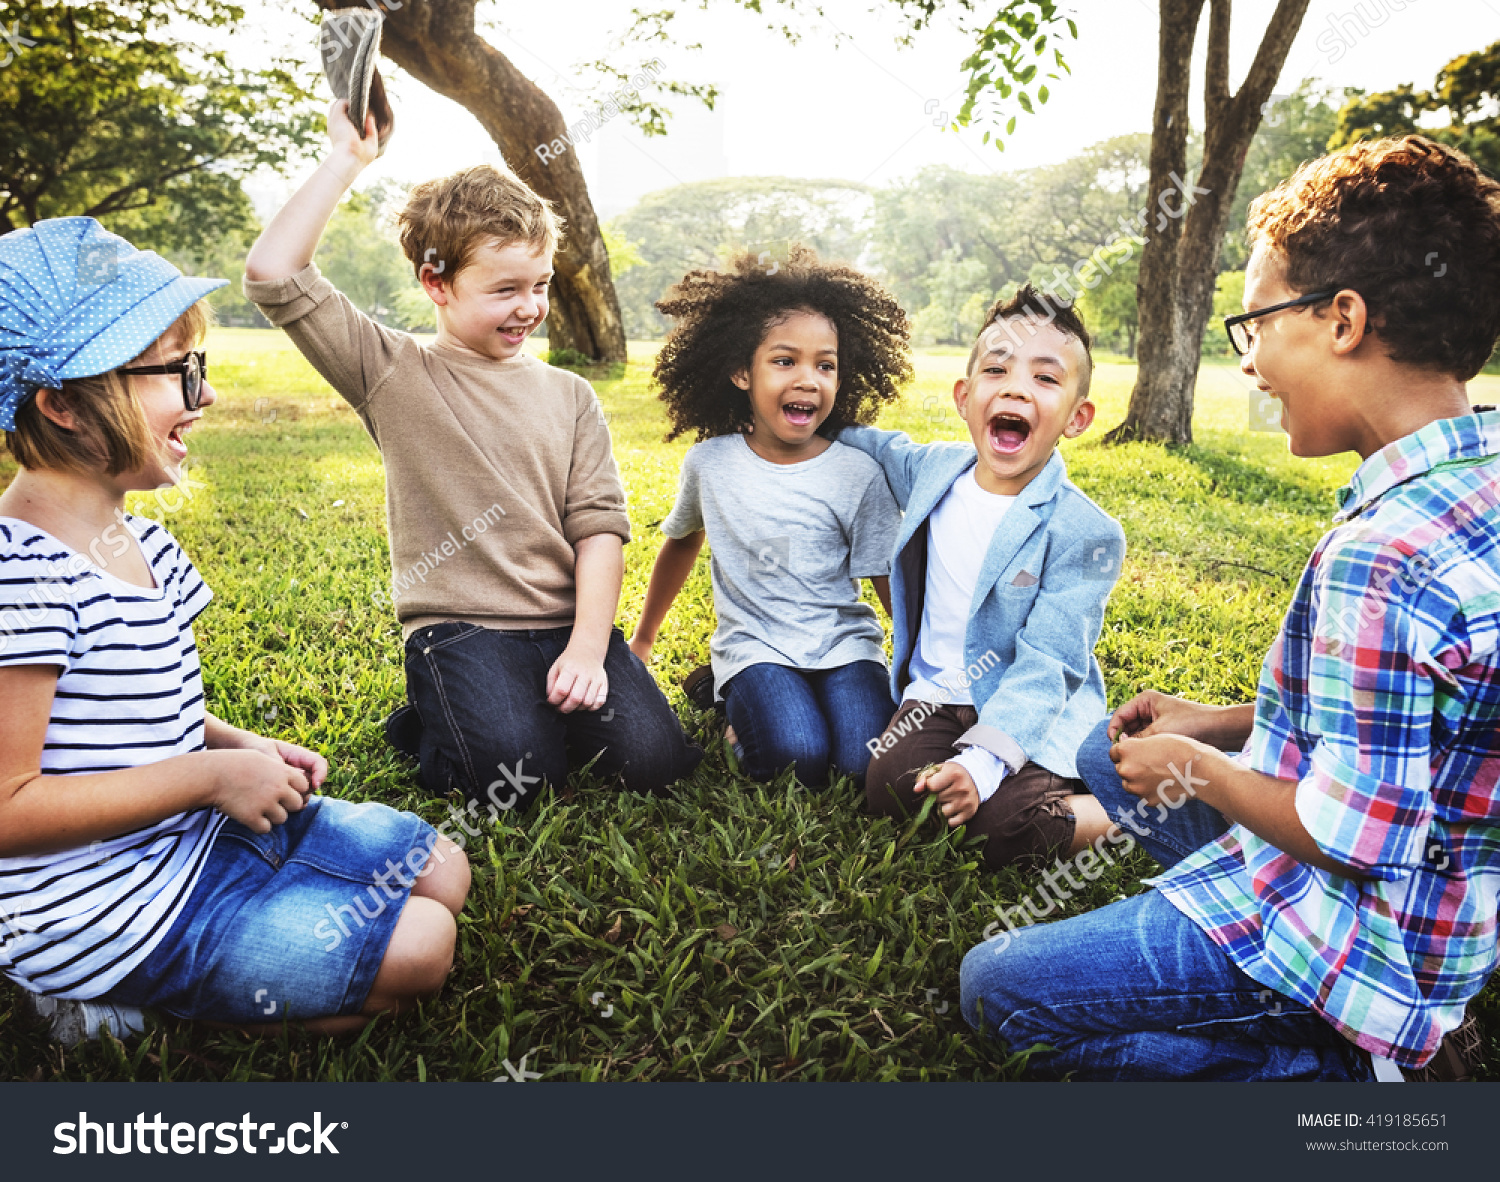 Kids Playing Cheerful Park Outdoors Concept #419185651